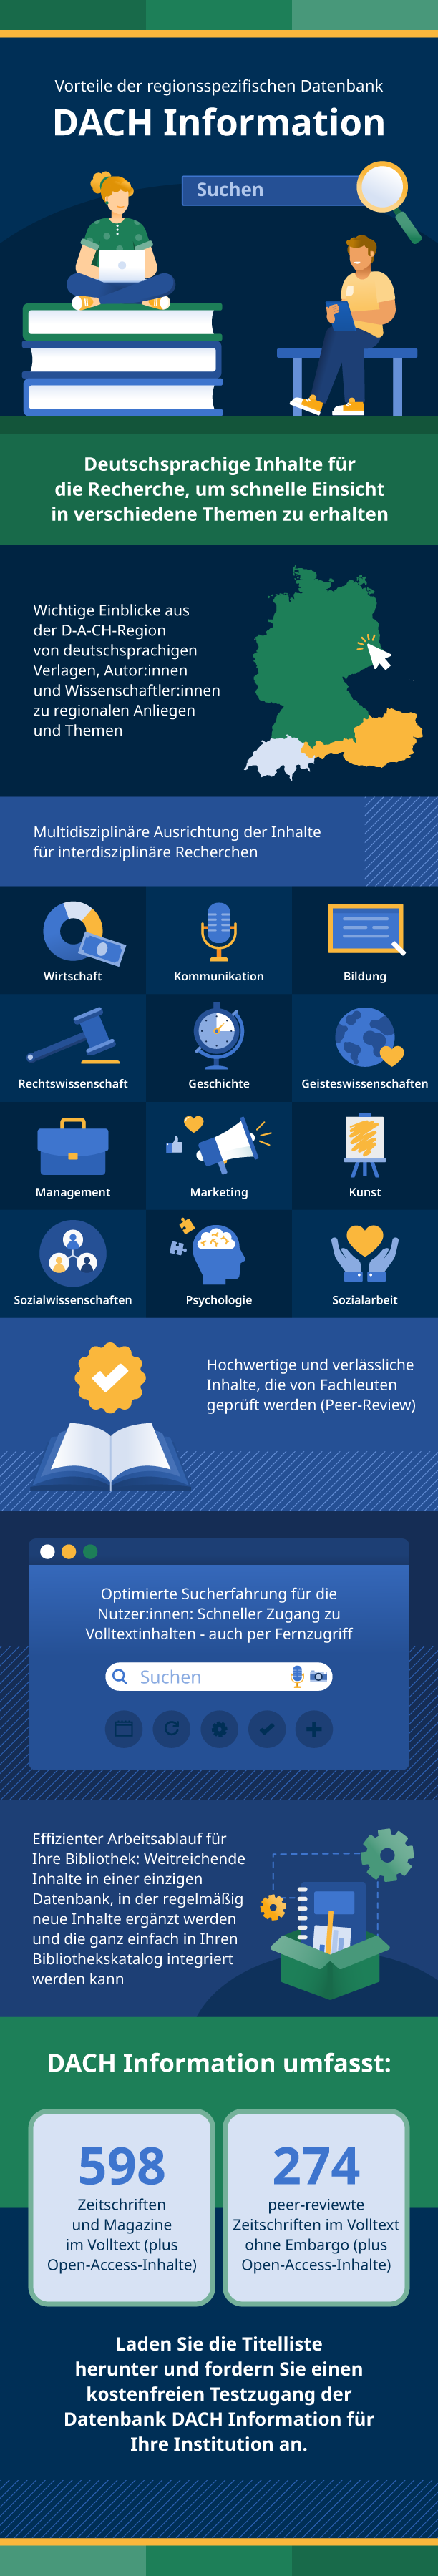 DACH Information Infographic   